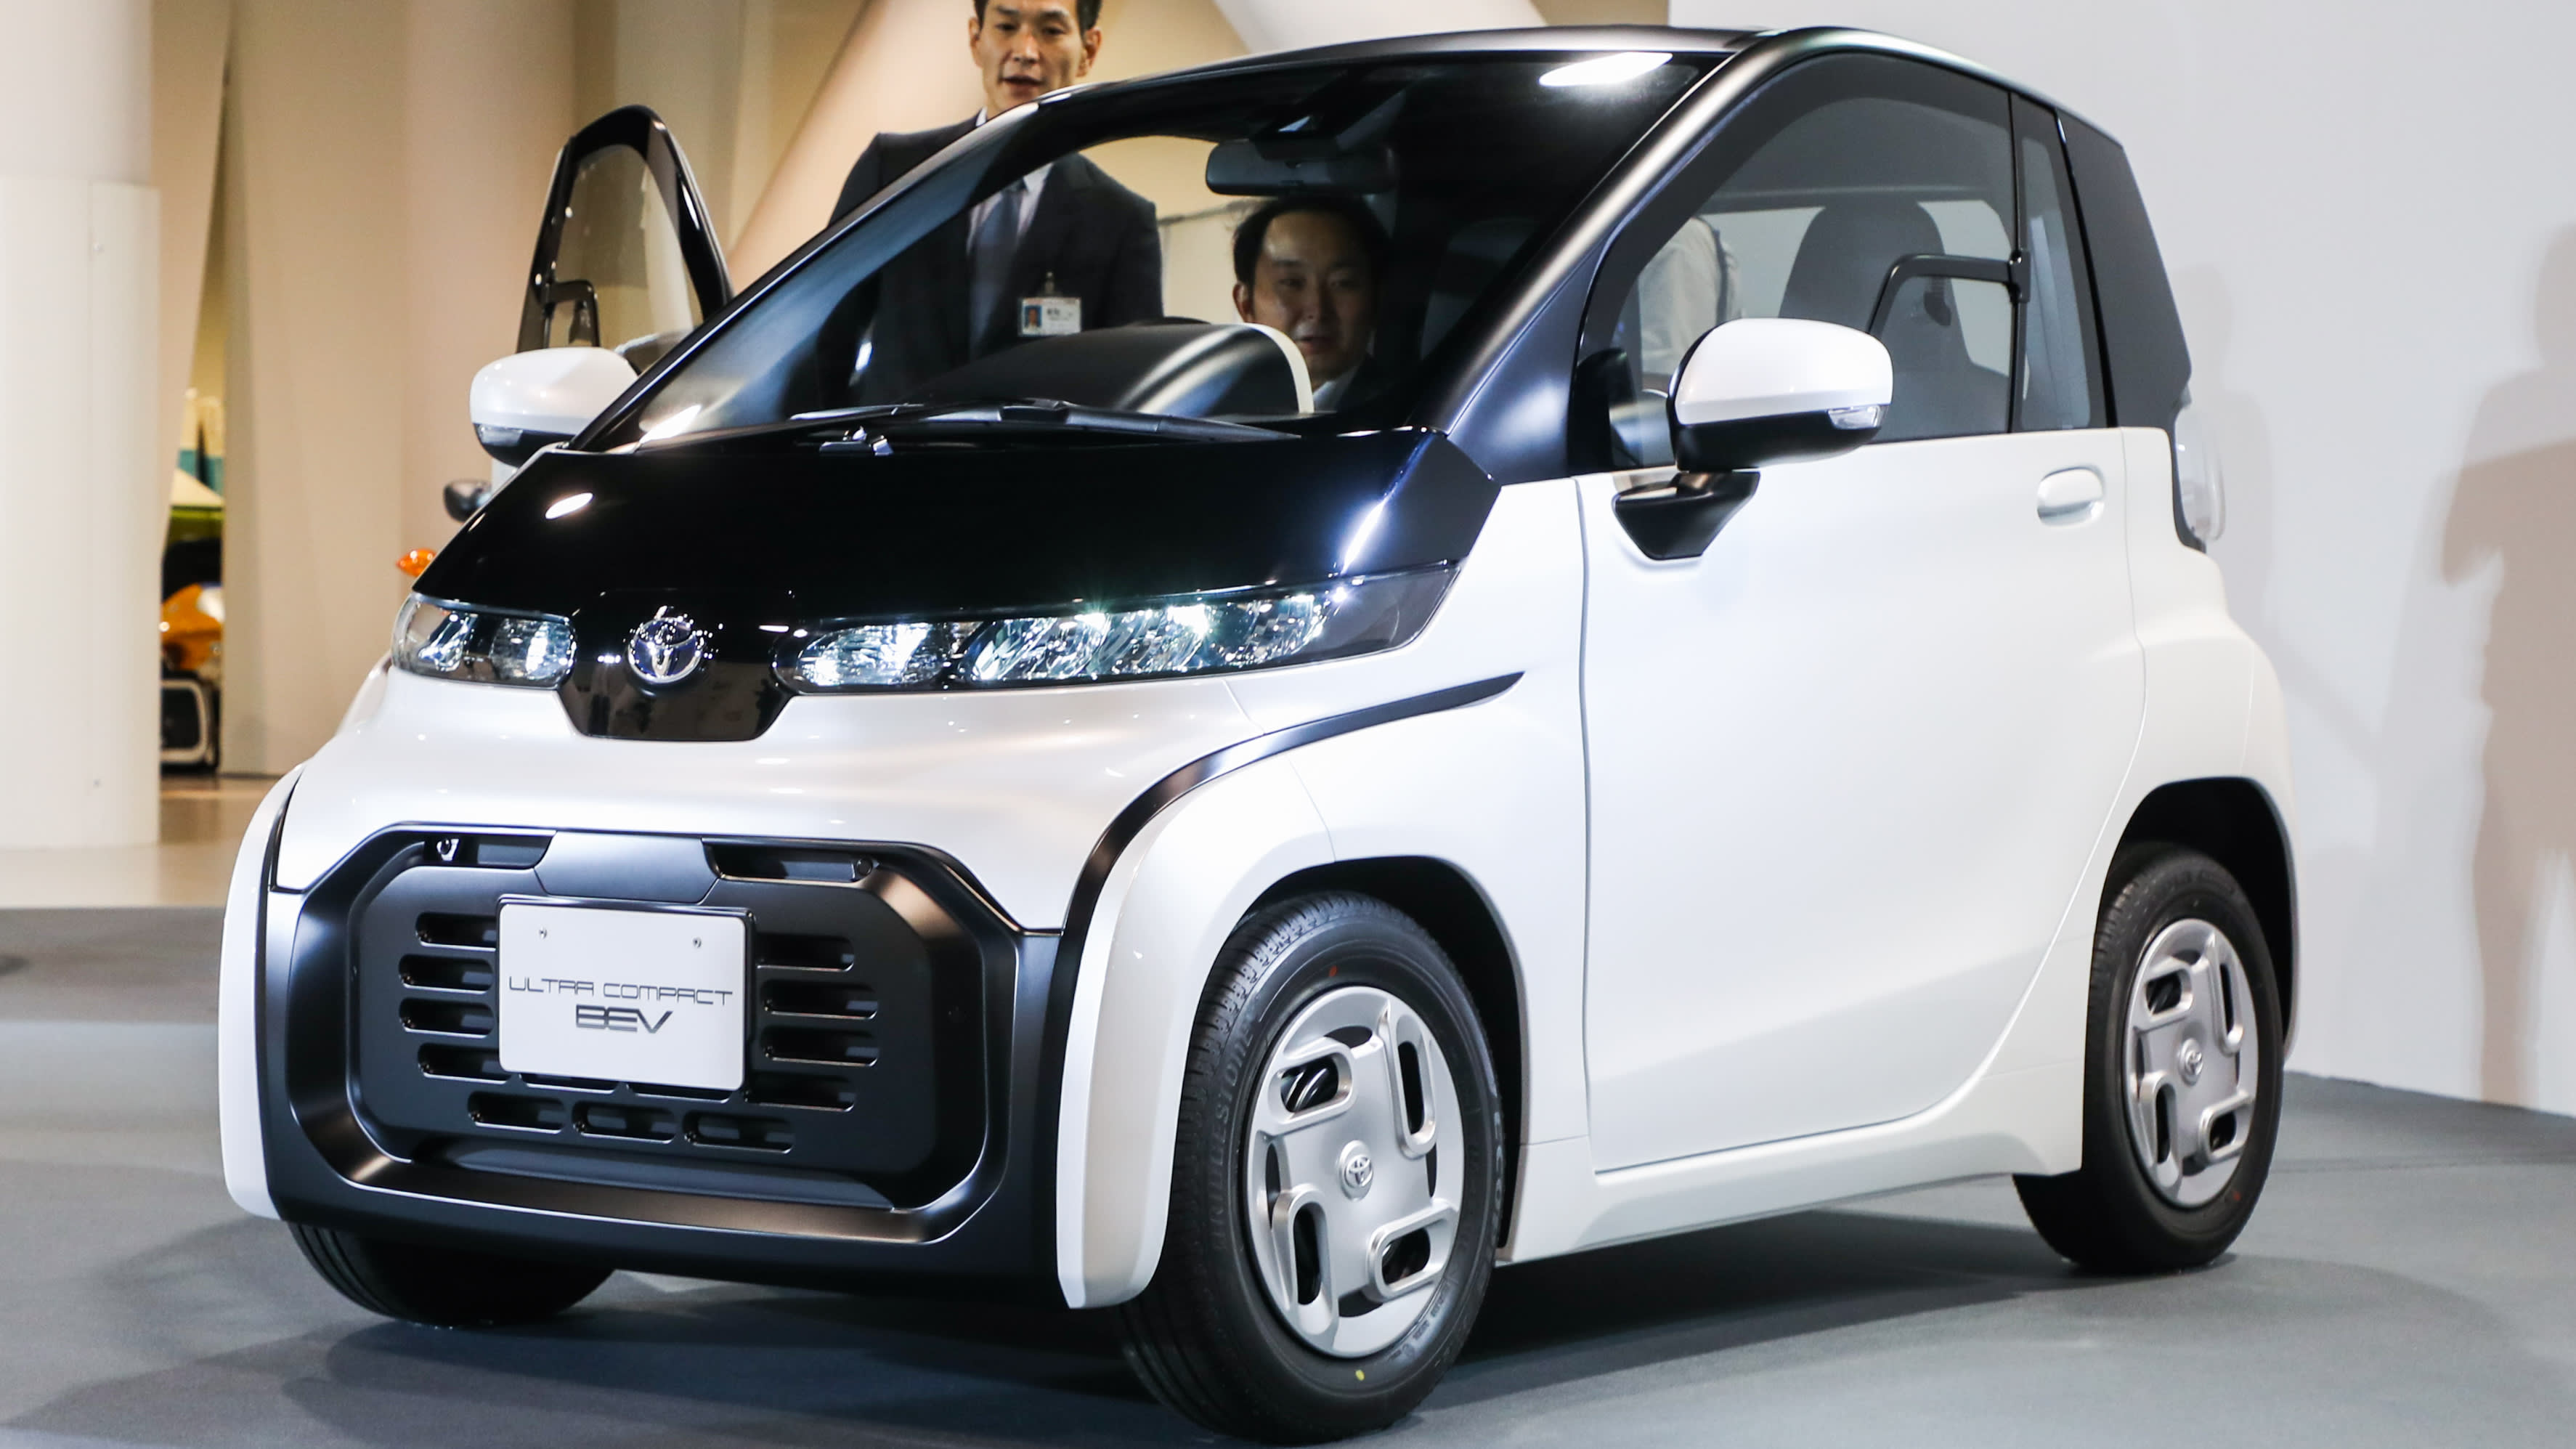 Toyota Creates an Electric Vehicle with Reusable Batteries - The Next